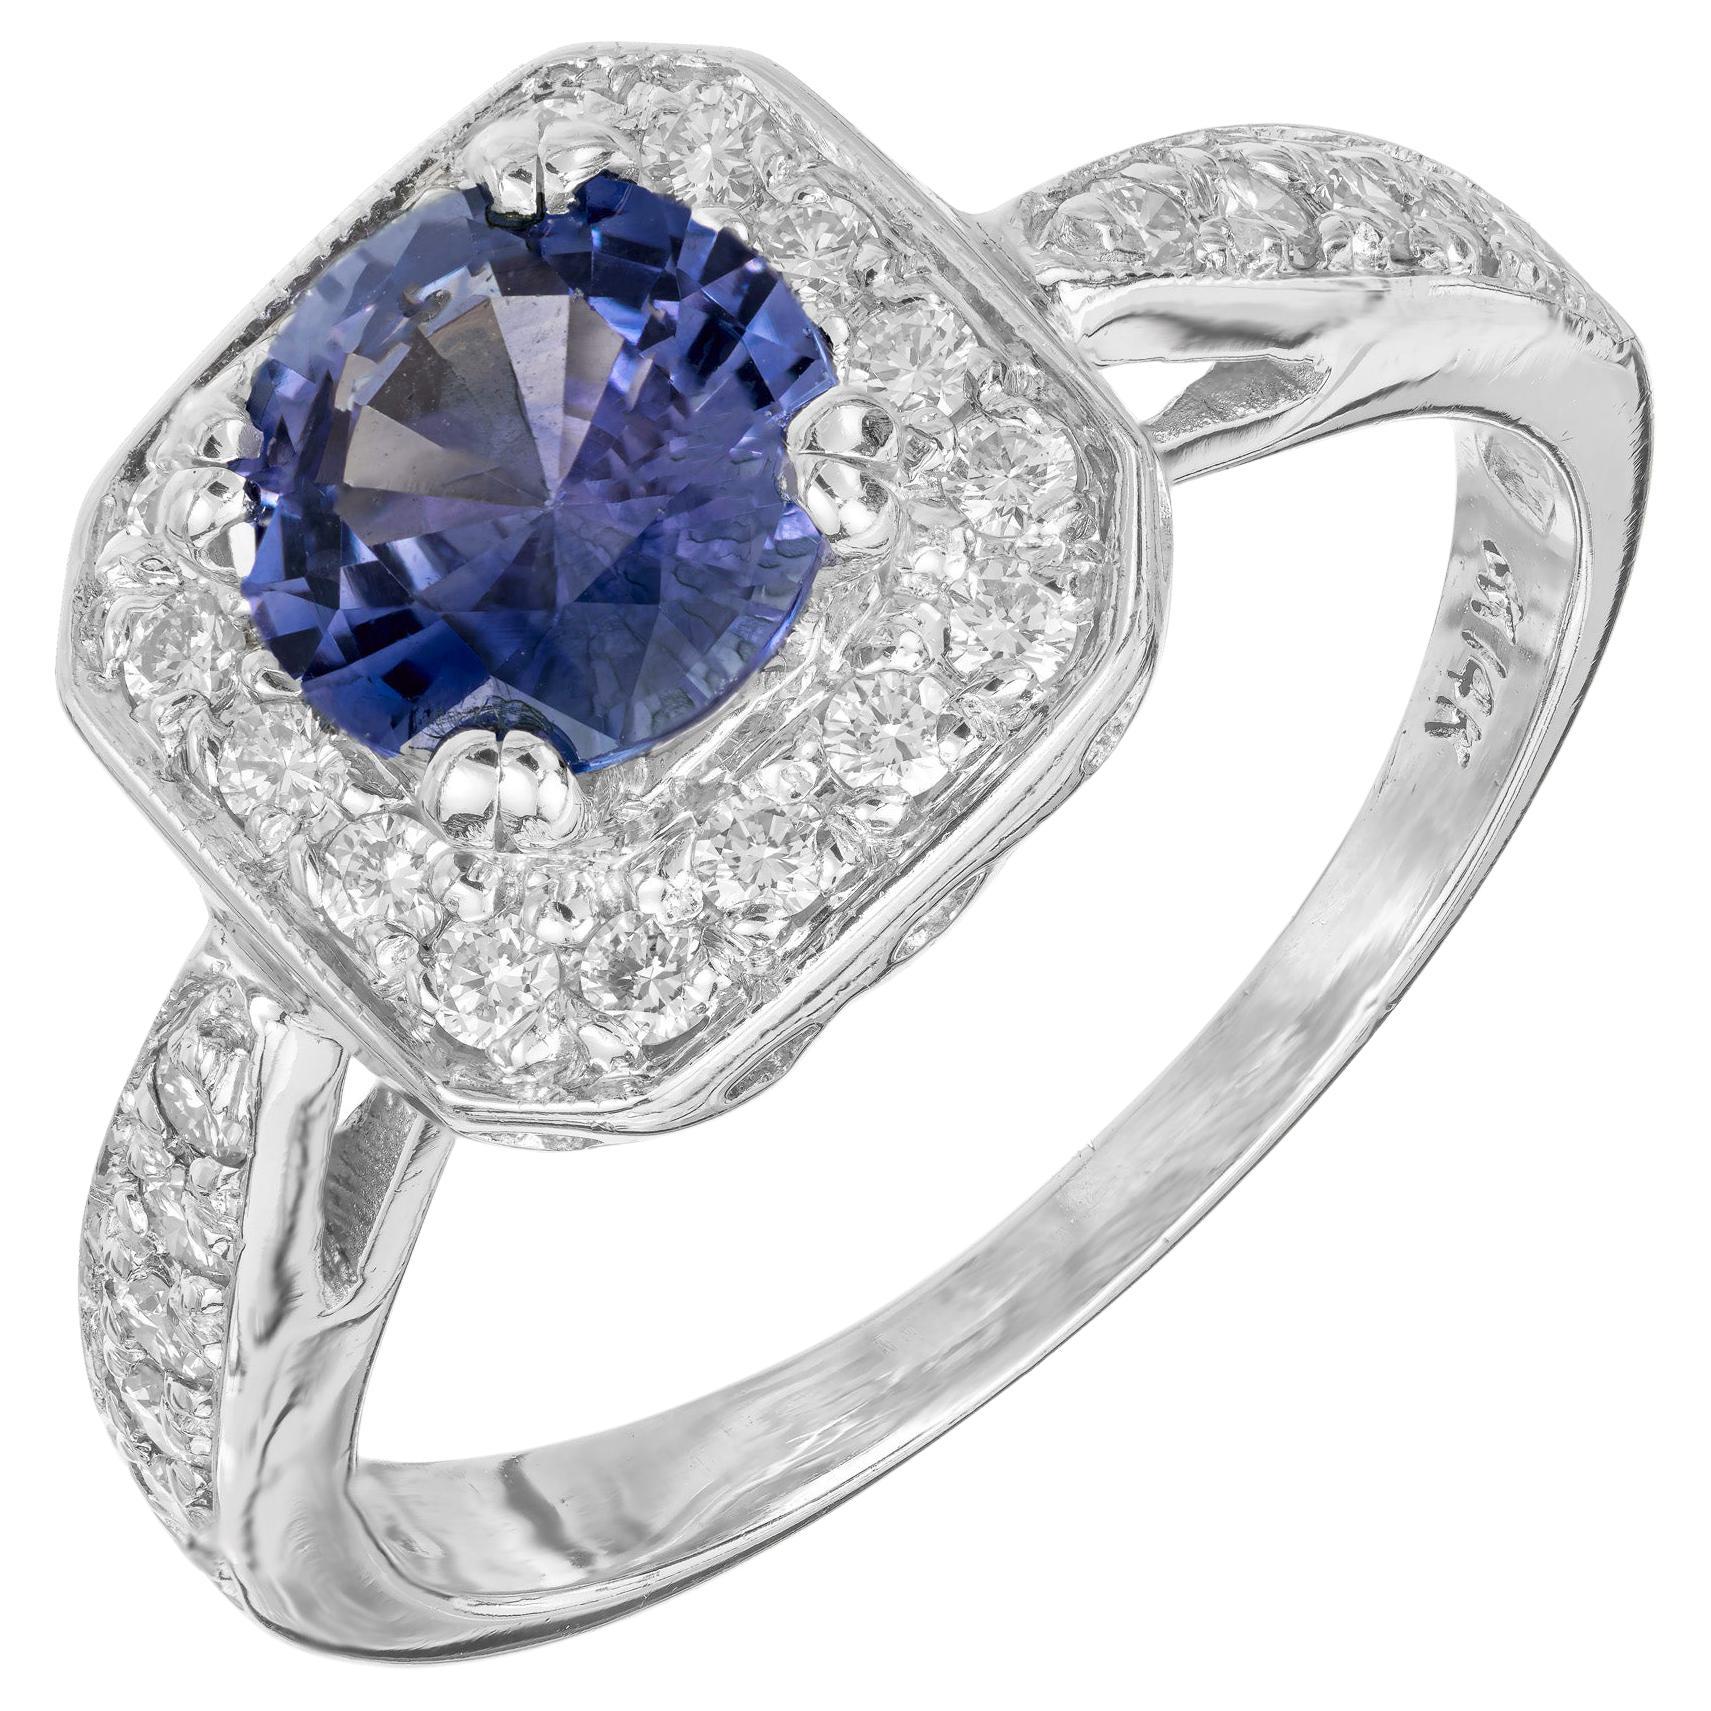 GIA Certified 1.11 Carat Blue Sapphire Diamond Halo White Gold Engagement Ring